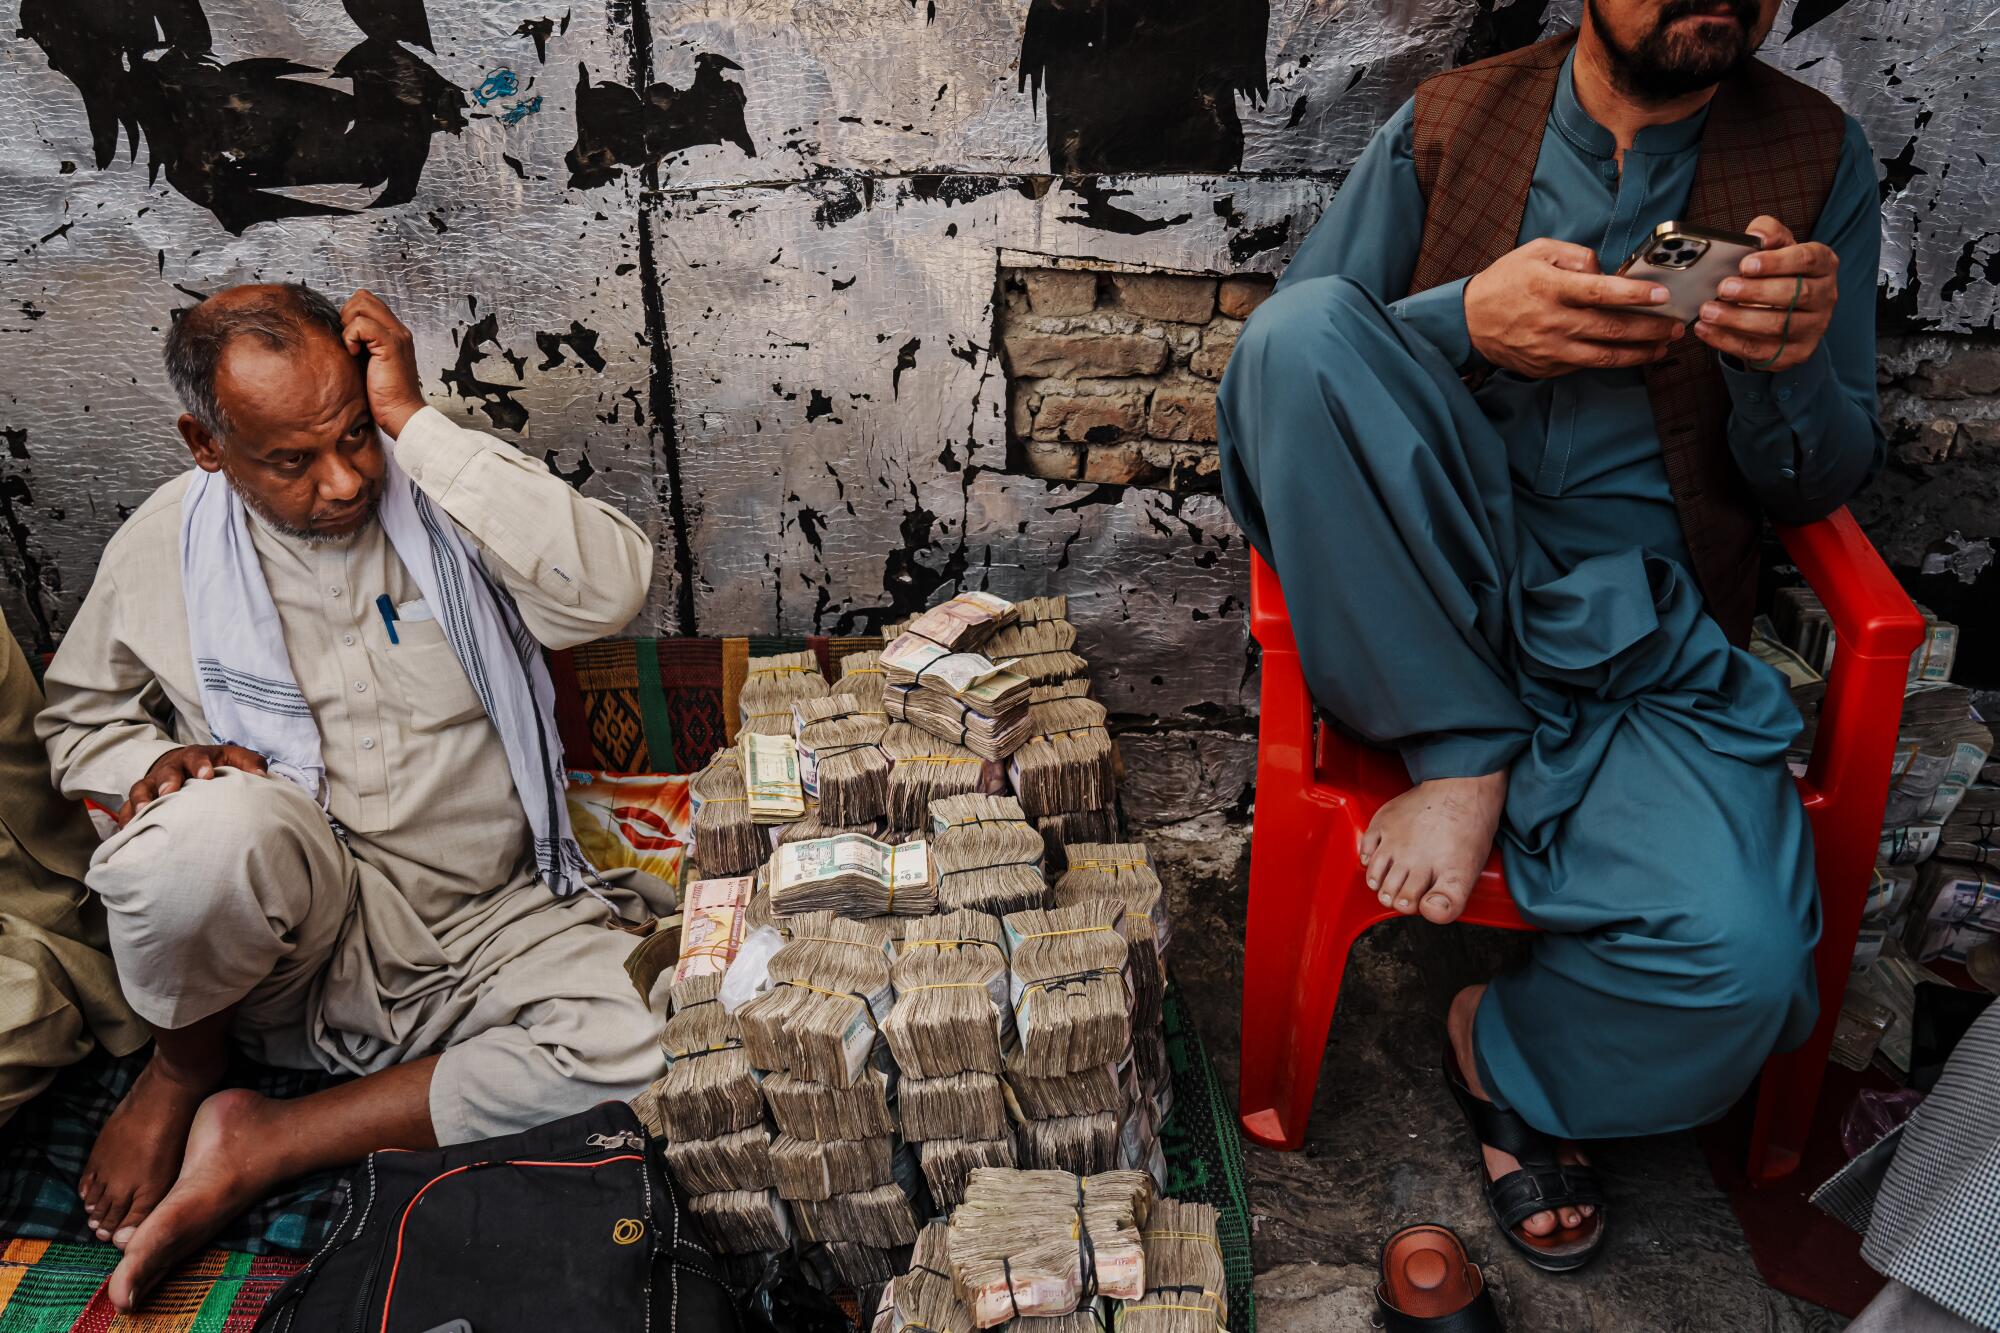 Money-changers next to stacks of Afghan currency